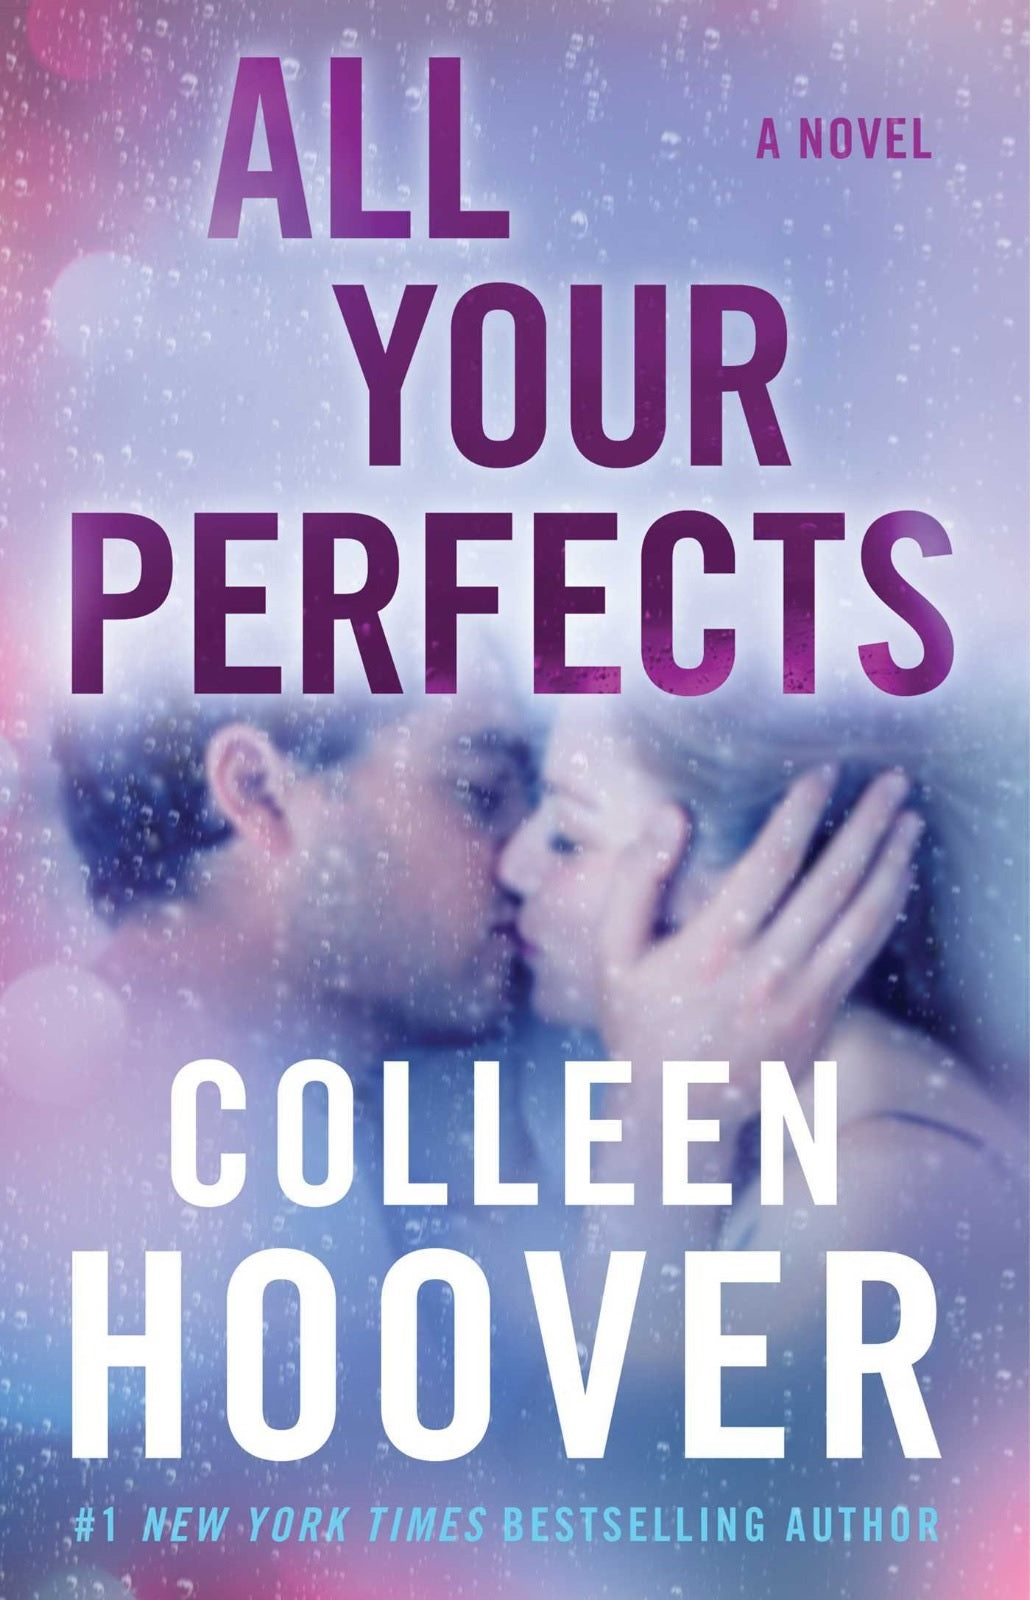 All Your Perfects A Novel by Colleen Hoover